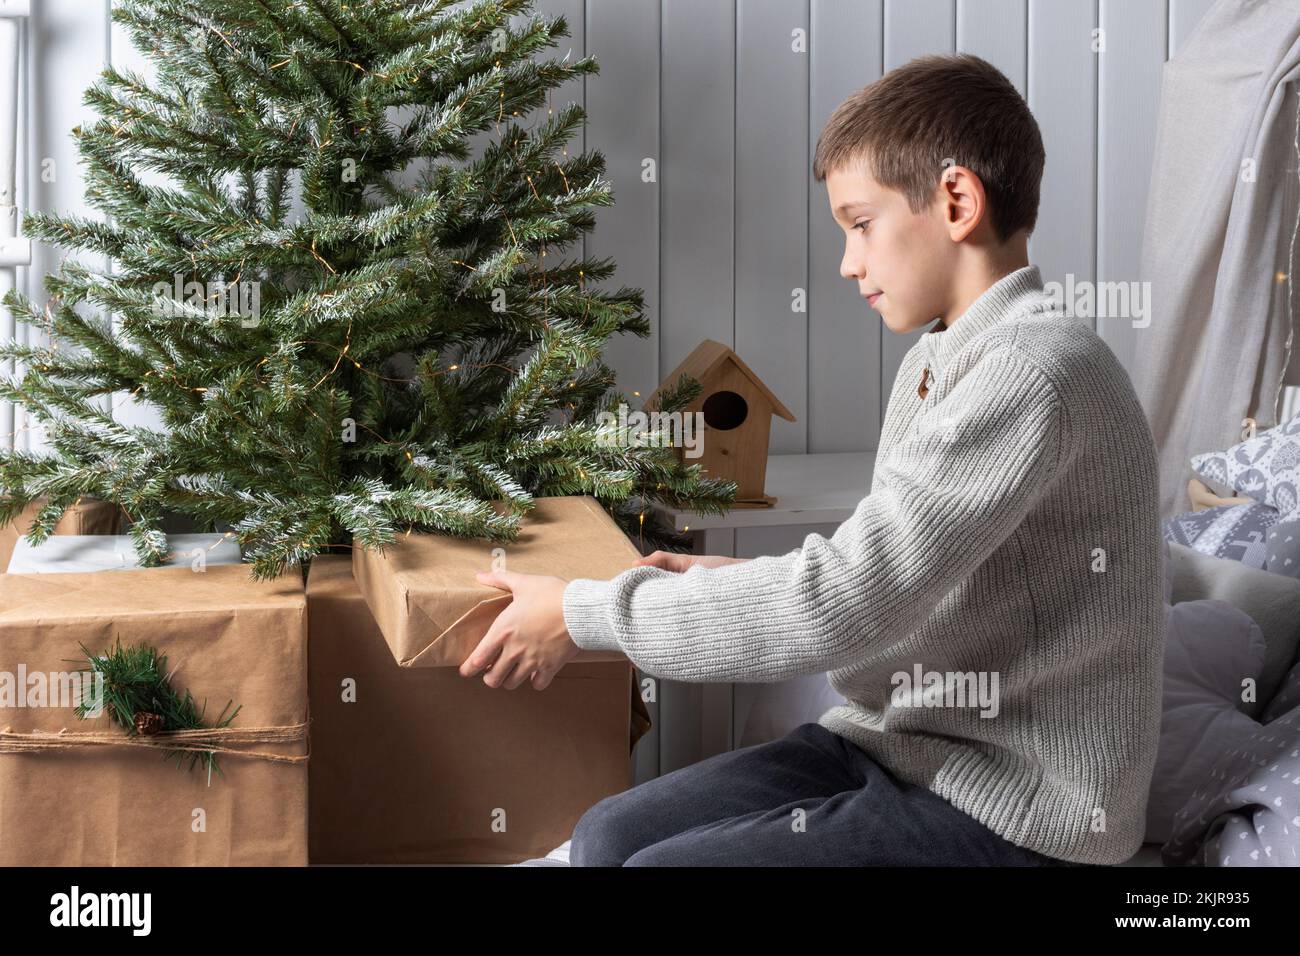 Cute teenage boy in a sweater sitting on the bed and putting presents under the Christmas tree. New Year's morning. Christmas Family Gifts Stock Photo